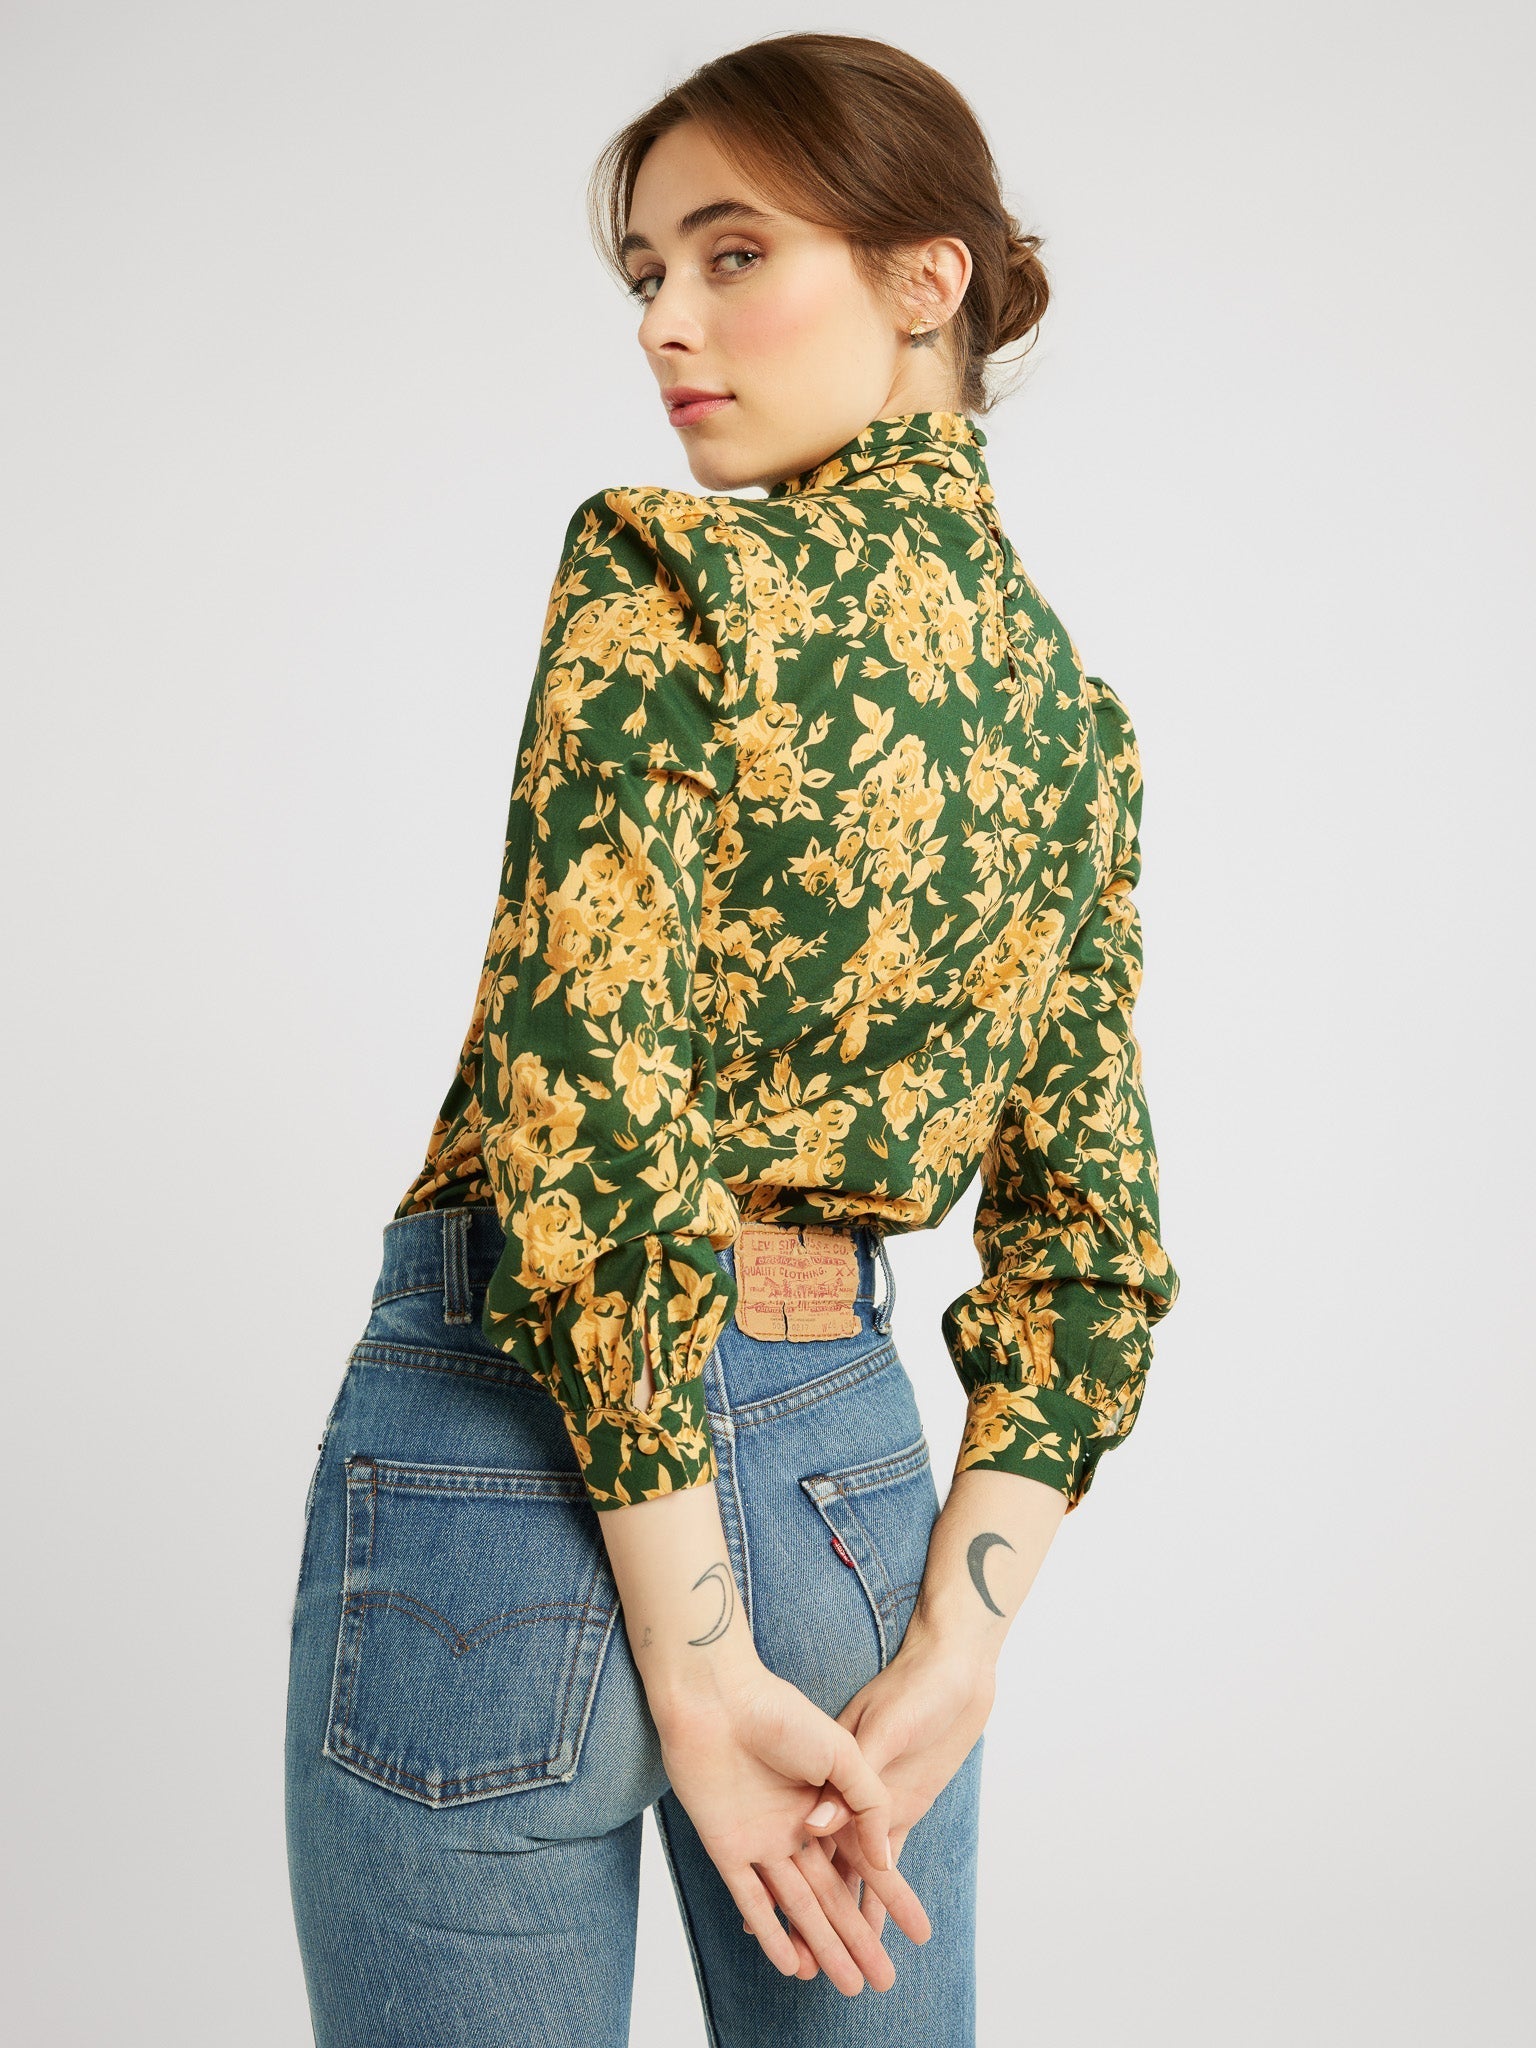 MILLE Clothing Charlotte Top in Emerald Bouquet